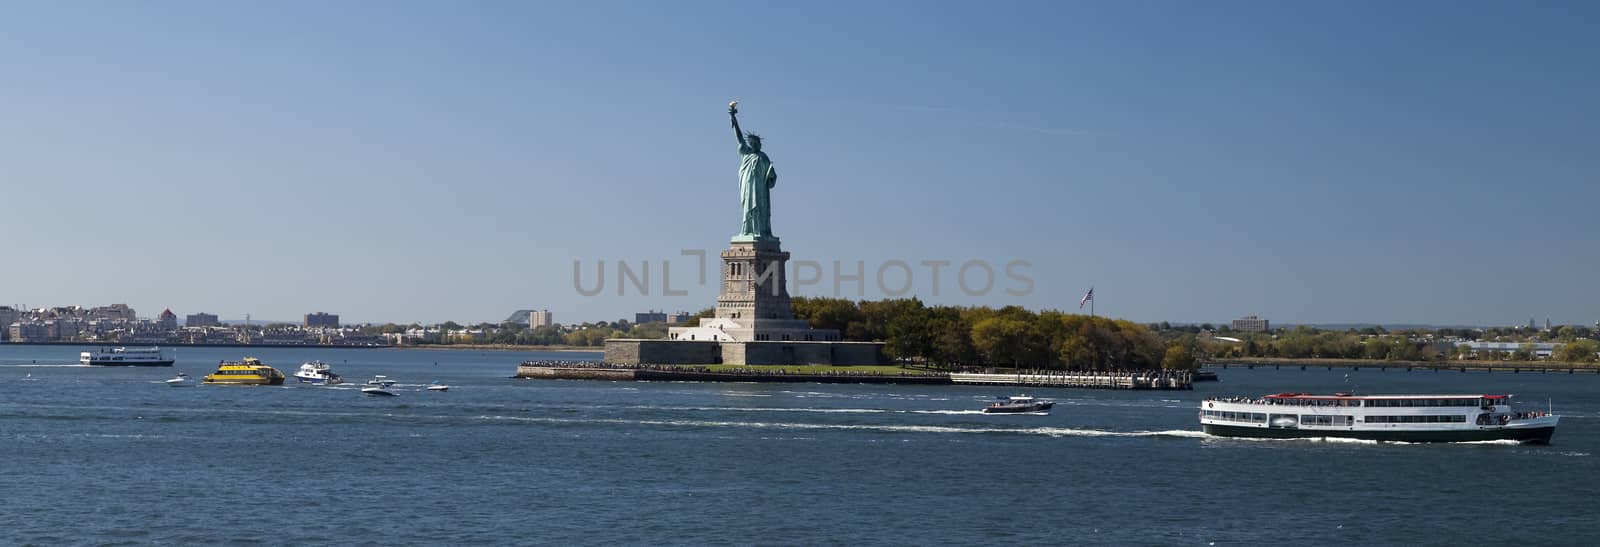 The Statue of Liberty by hanusst